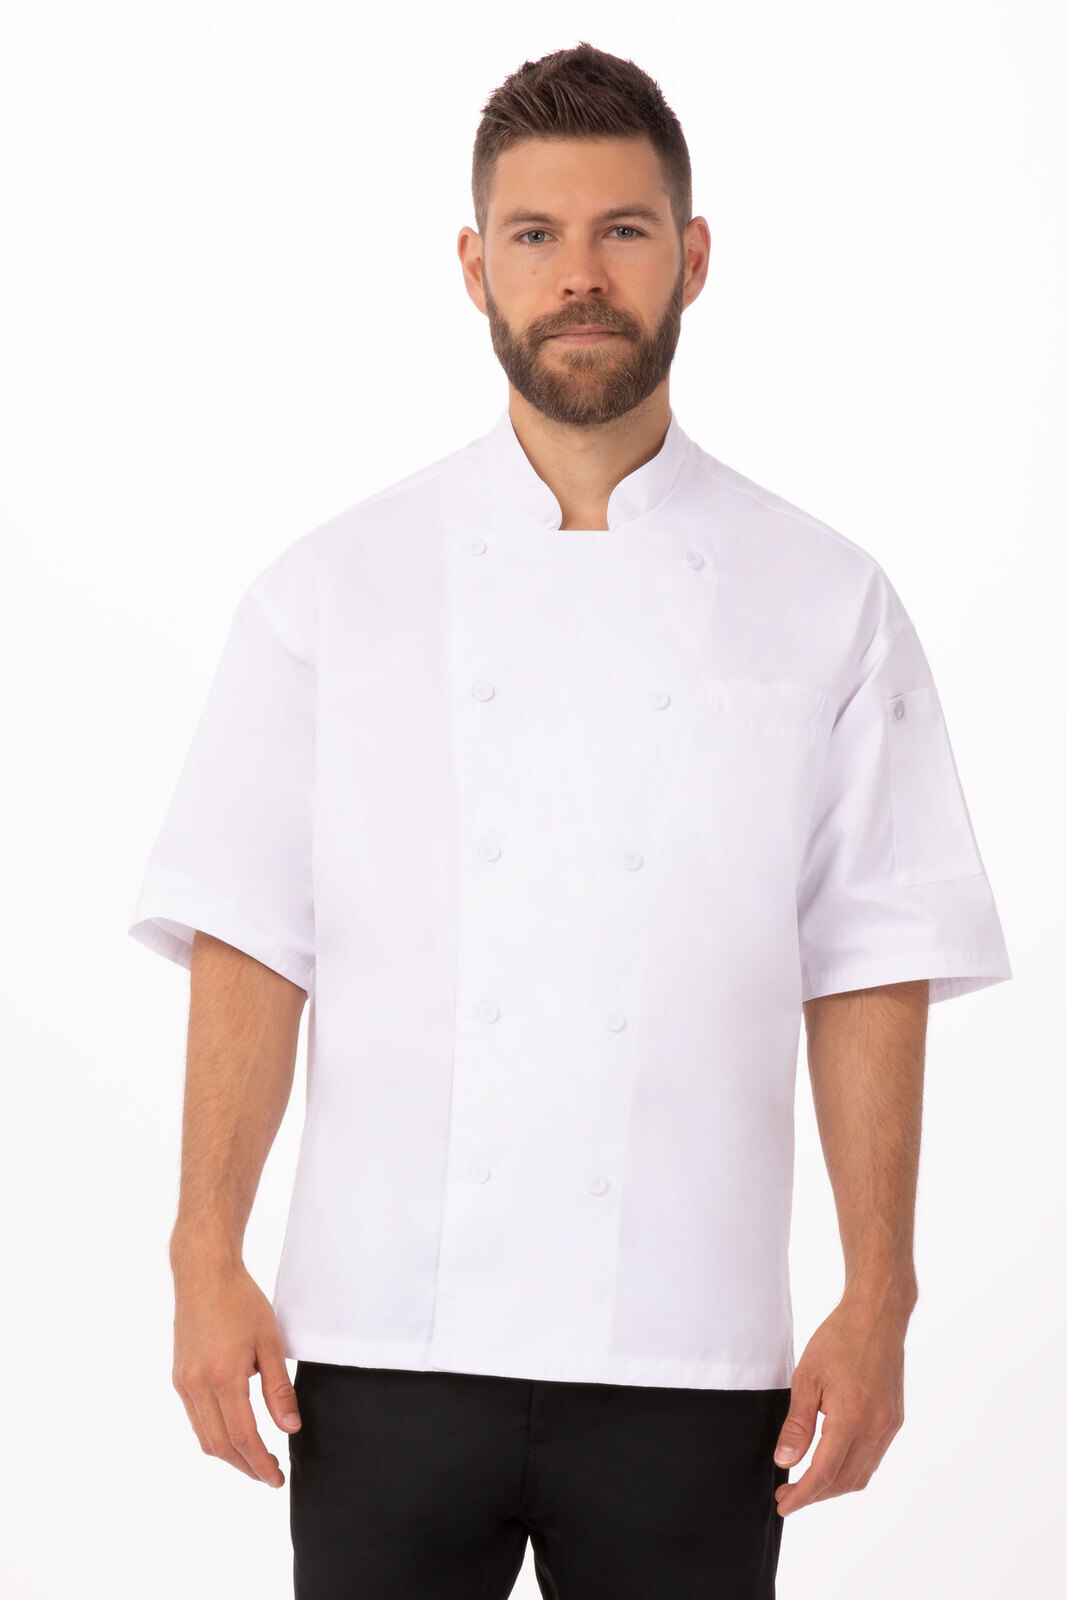 Palermo Executive Chef Jacket - Chef Works